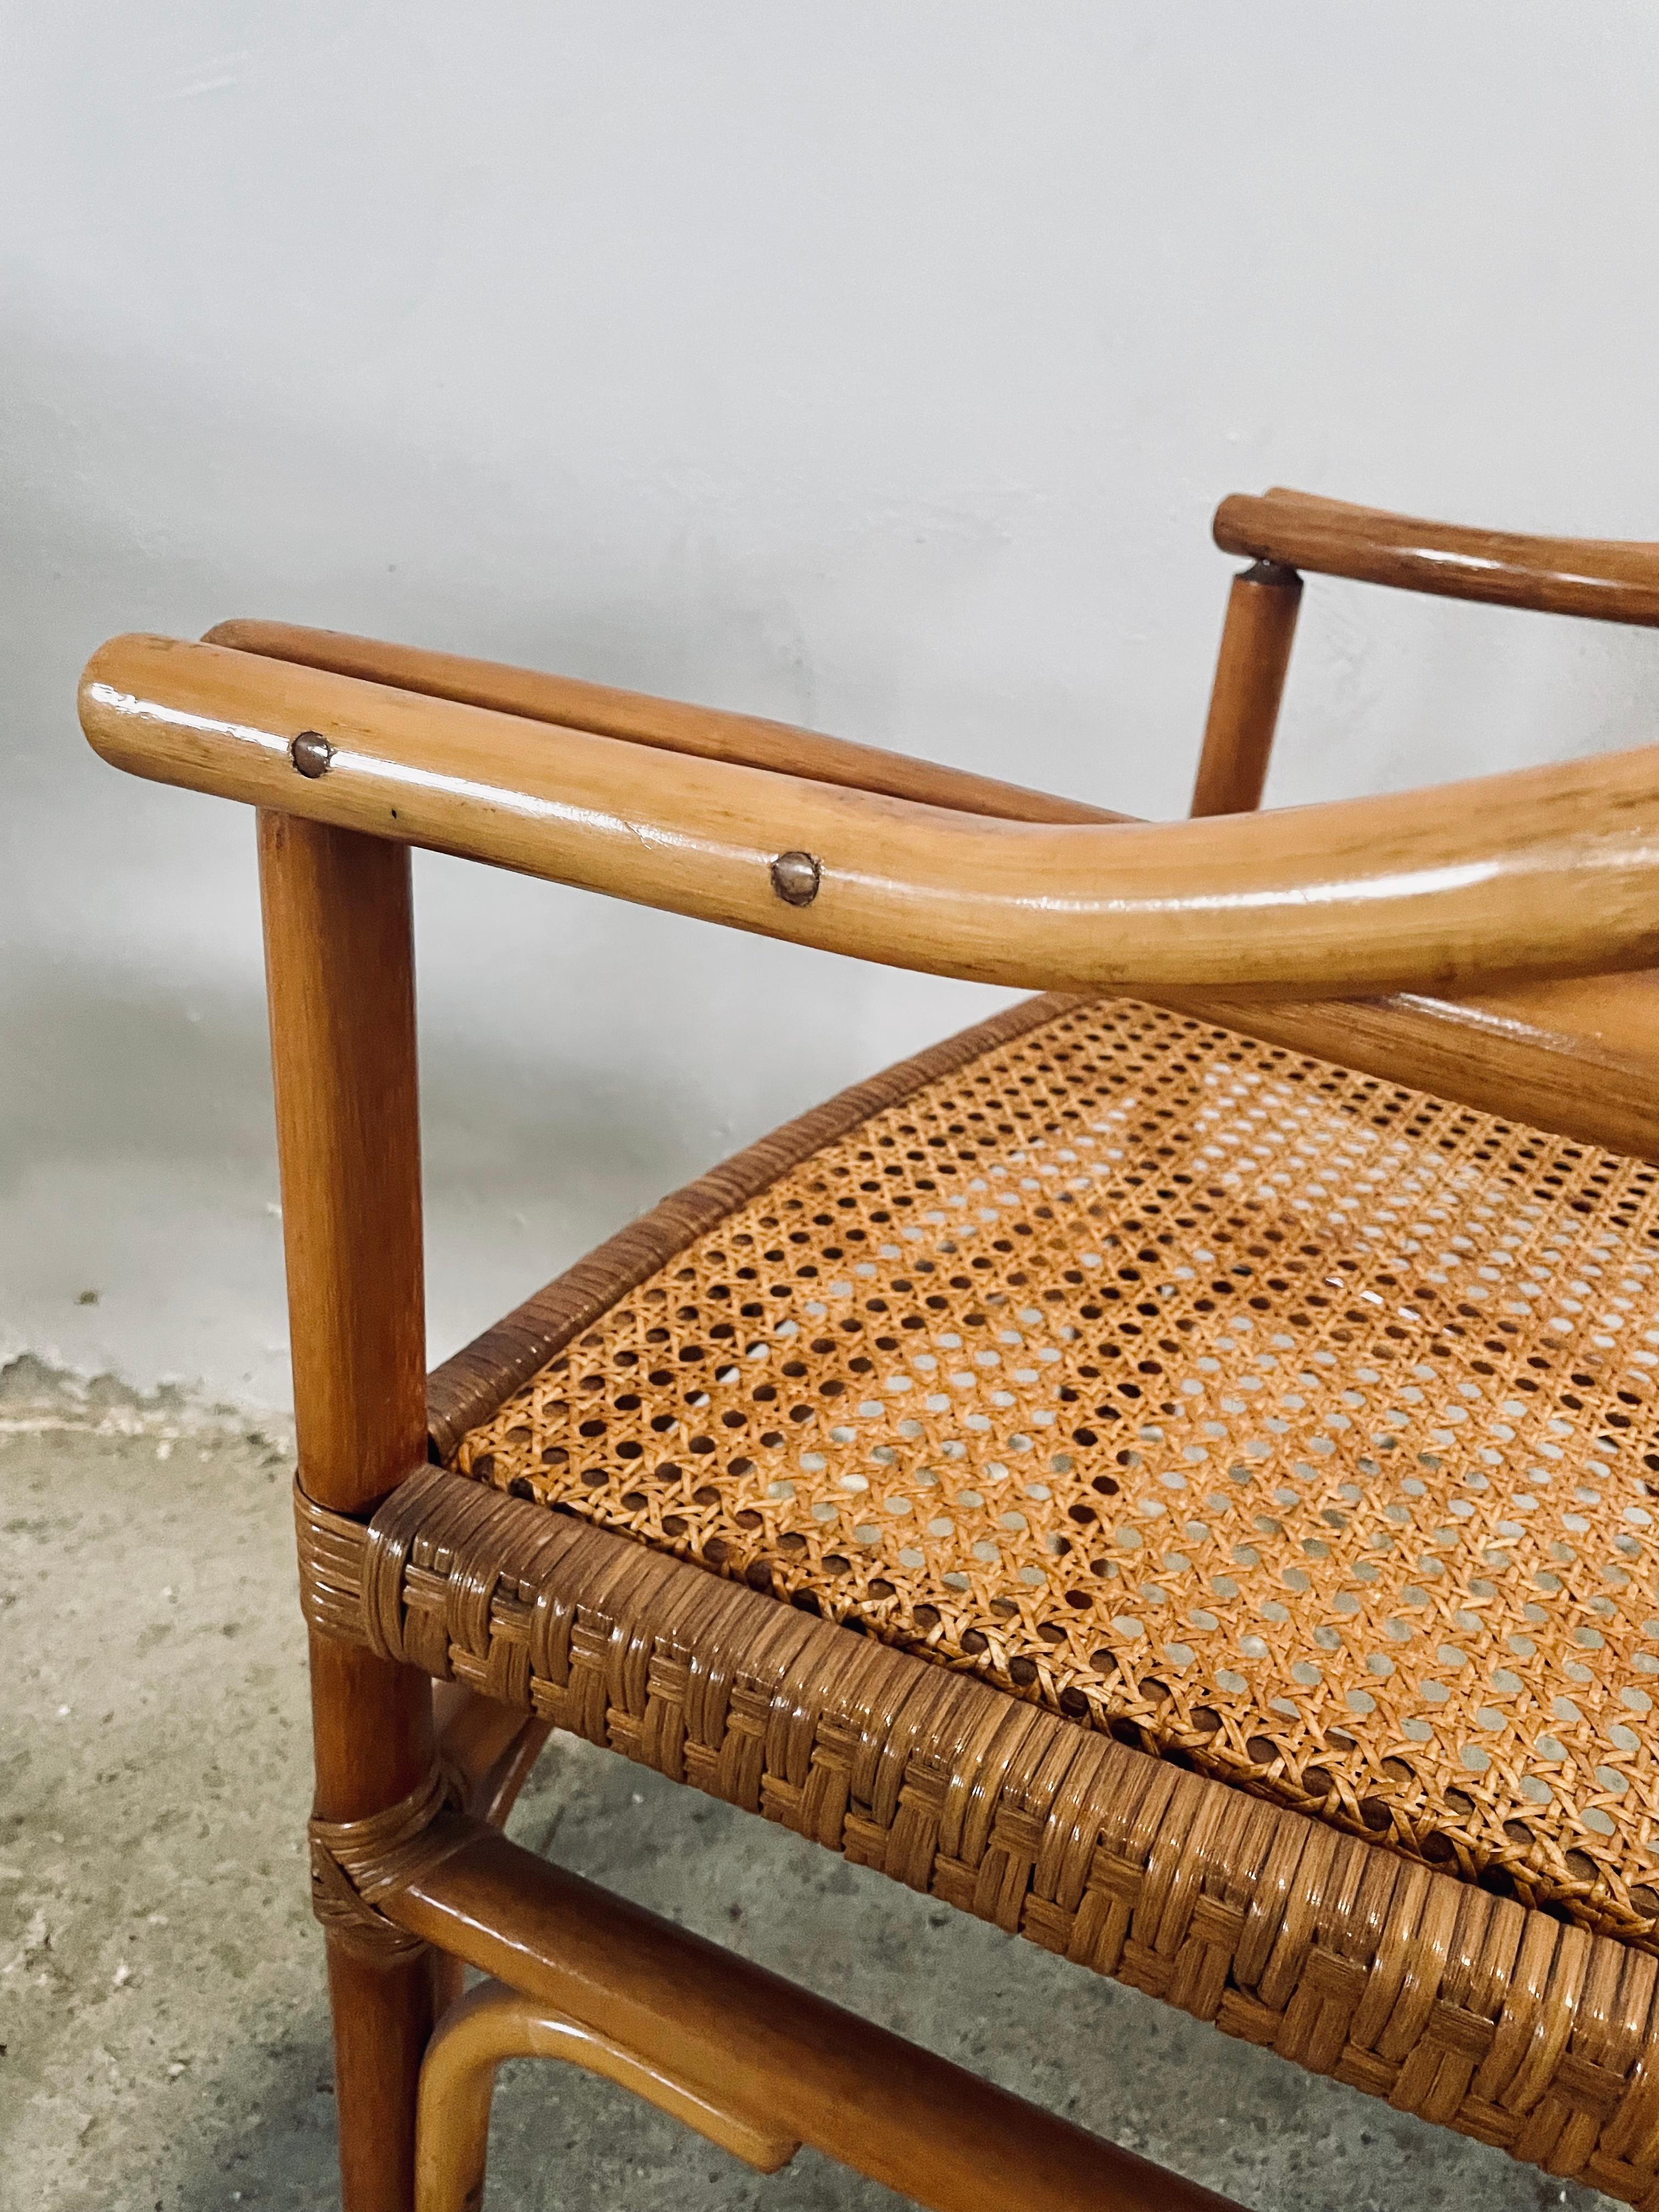 1 of 3, Rare French Vintage Bistro rattan and/o bamboo Chairs or dining chairs, original color, great patina, sturdy, strong frames, new rattan seats just replaced.

**Le prix de l'offre est pour CHAQUE chaise, il y en a trois de disponibles, vous